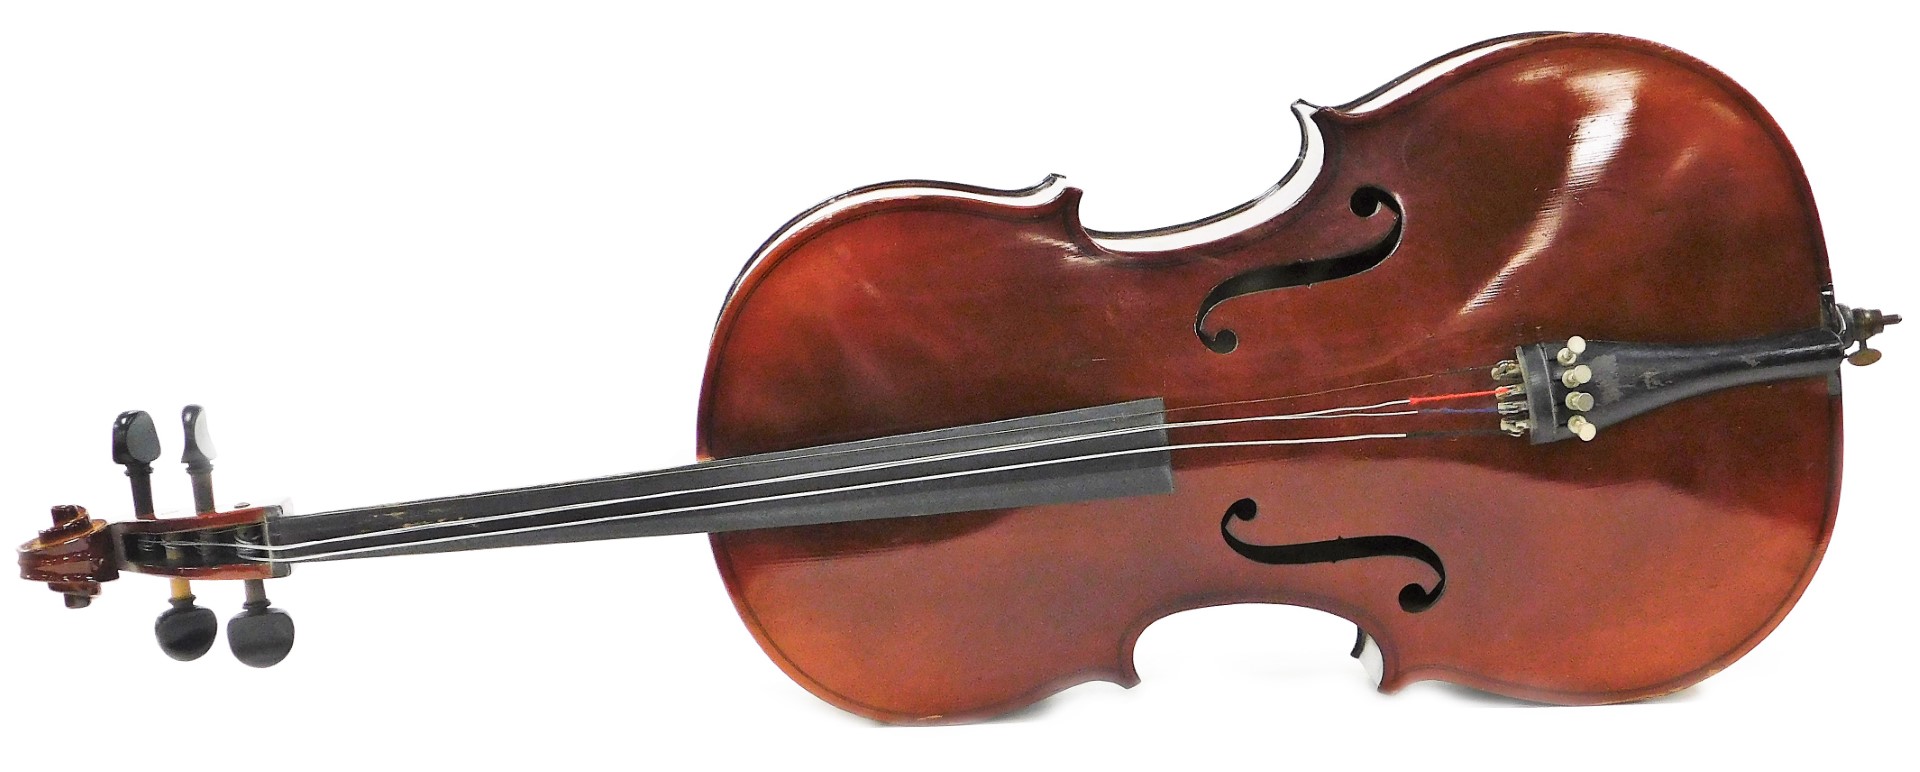 A 20thC Rosetti Stradivarius model cello, with one piece back, 103cm high. - Image 2 of 8